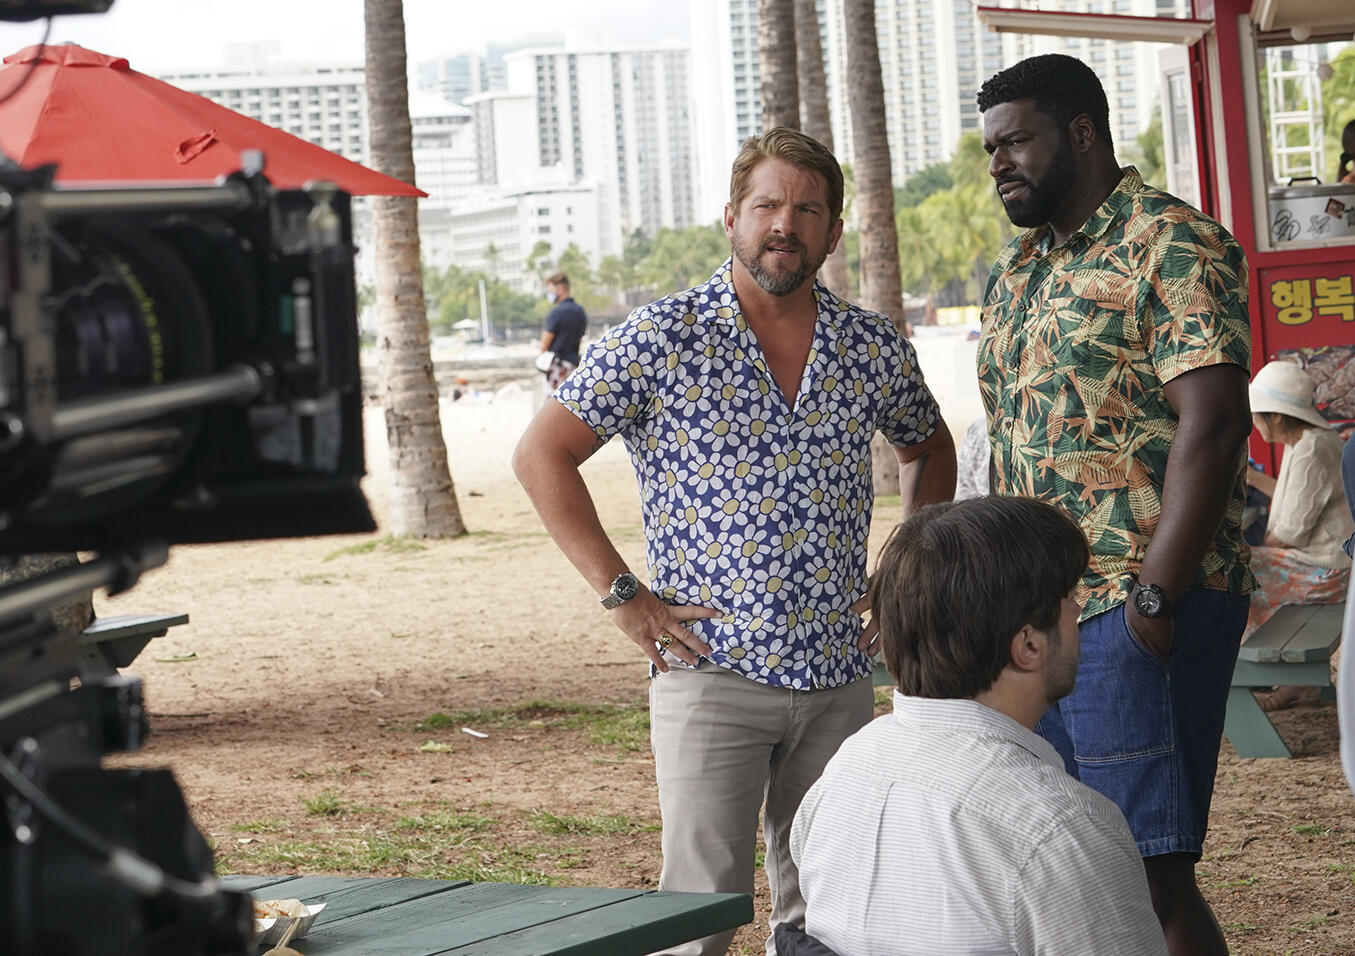 Zachary Knighton, left, and Stephen Hill in Magnum P.I.